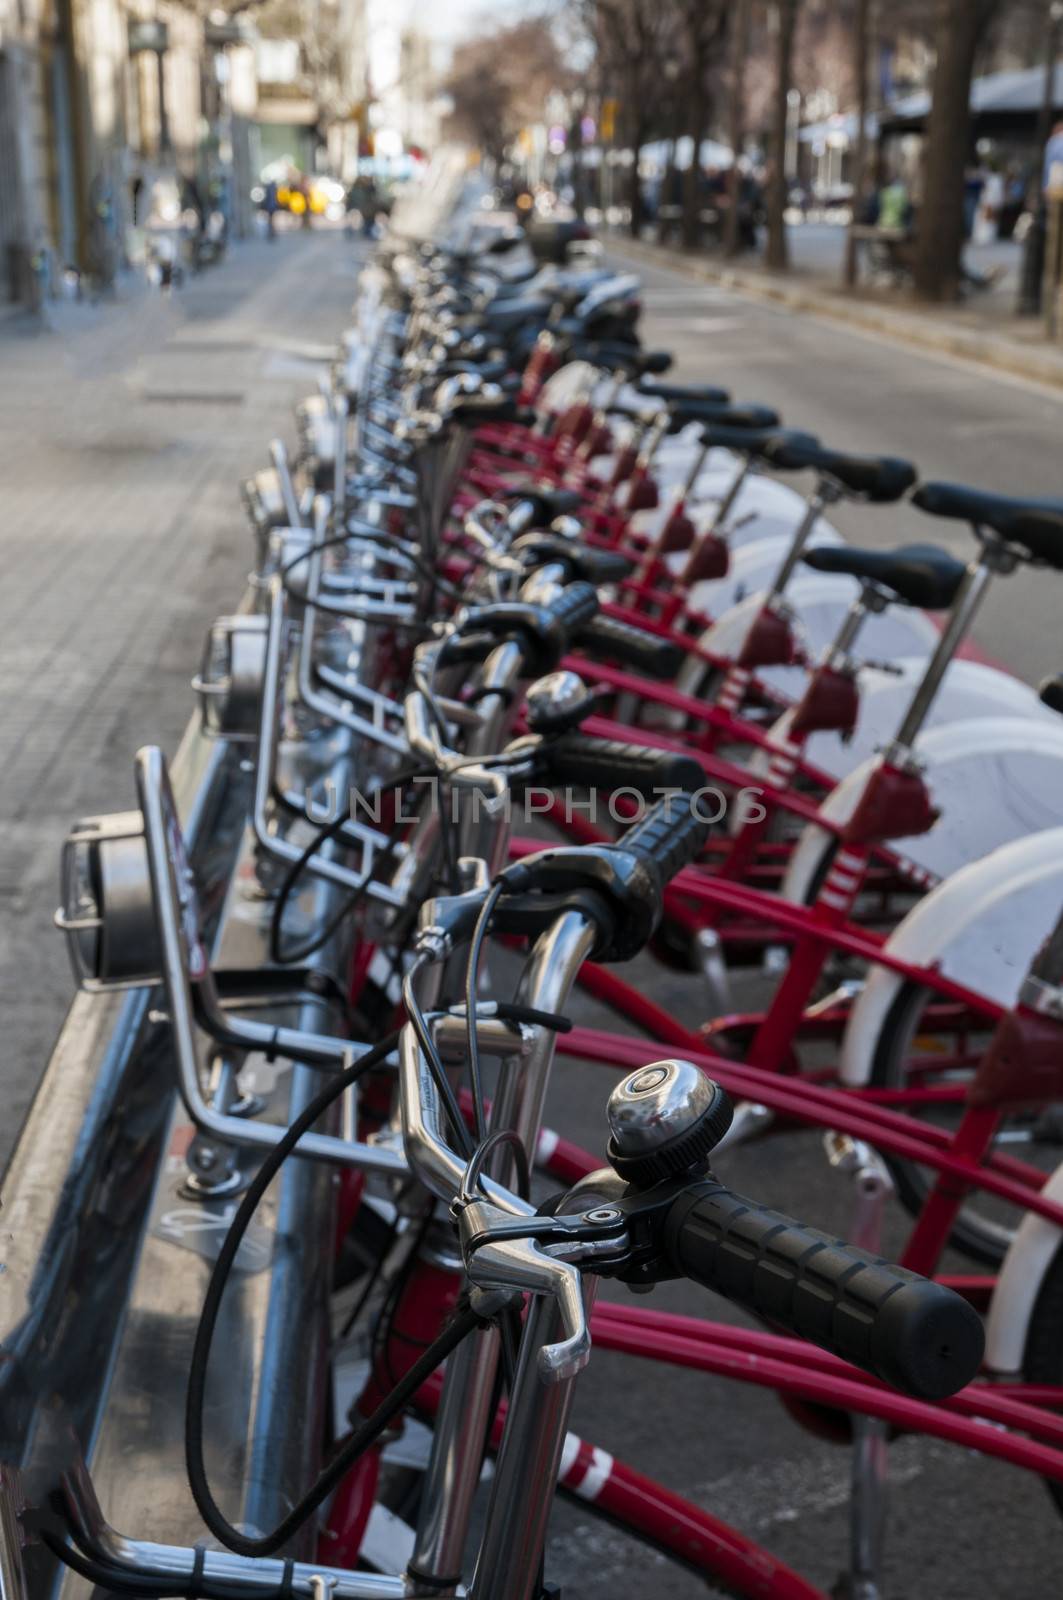 bikes lined up to rent them